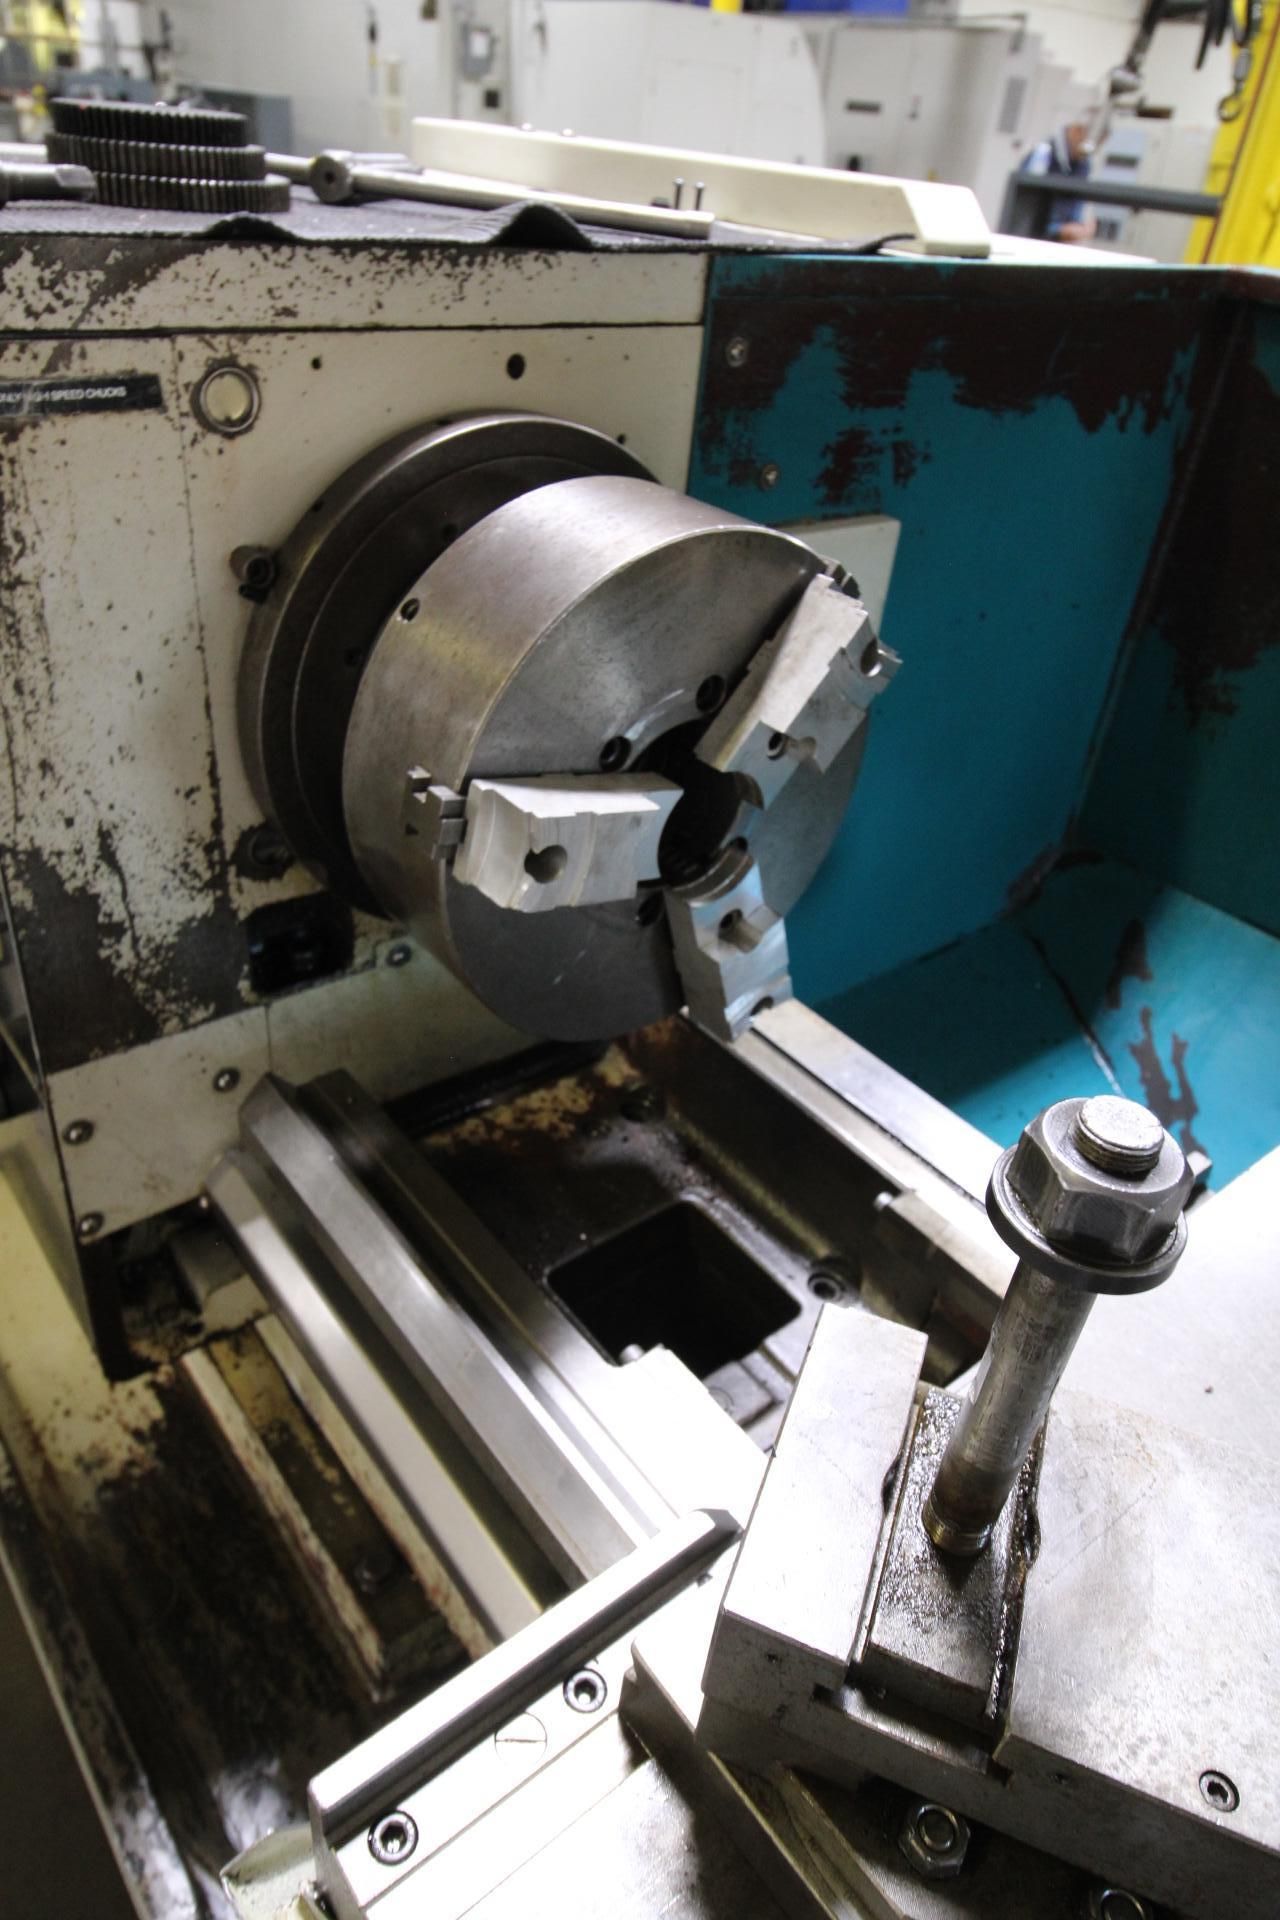 ENGINE LATHE, 18” X 80” HARRISON MDL. V460, new 2010, 12” 3-jaw chuck, gap bed, Newall DP700 2- - Image 8 of 11